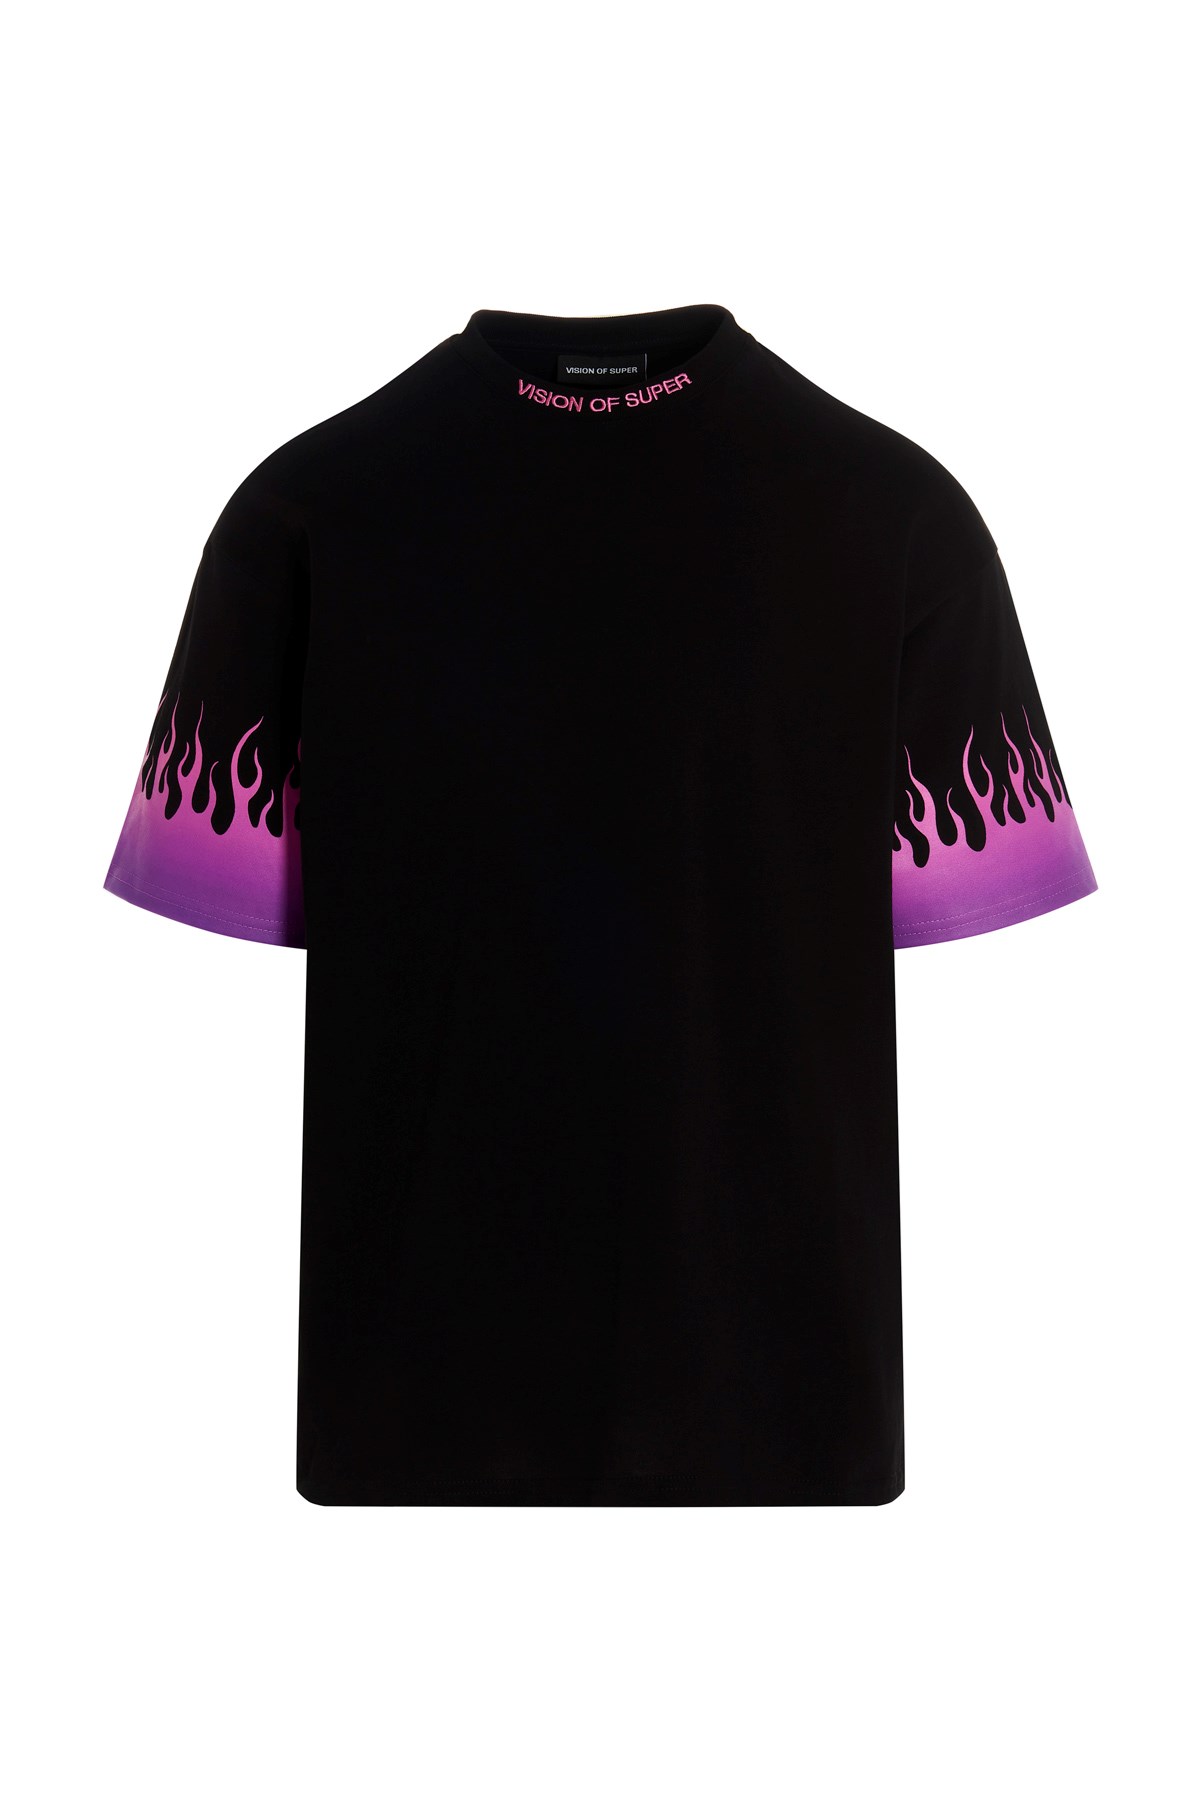 VISION OF SUPER 'Flame Purple’ T-Shirt